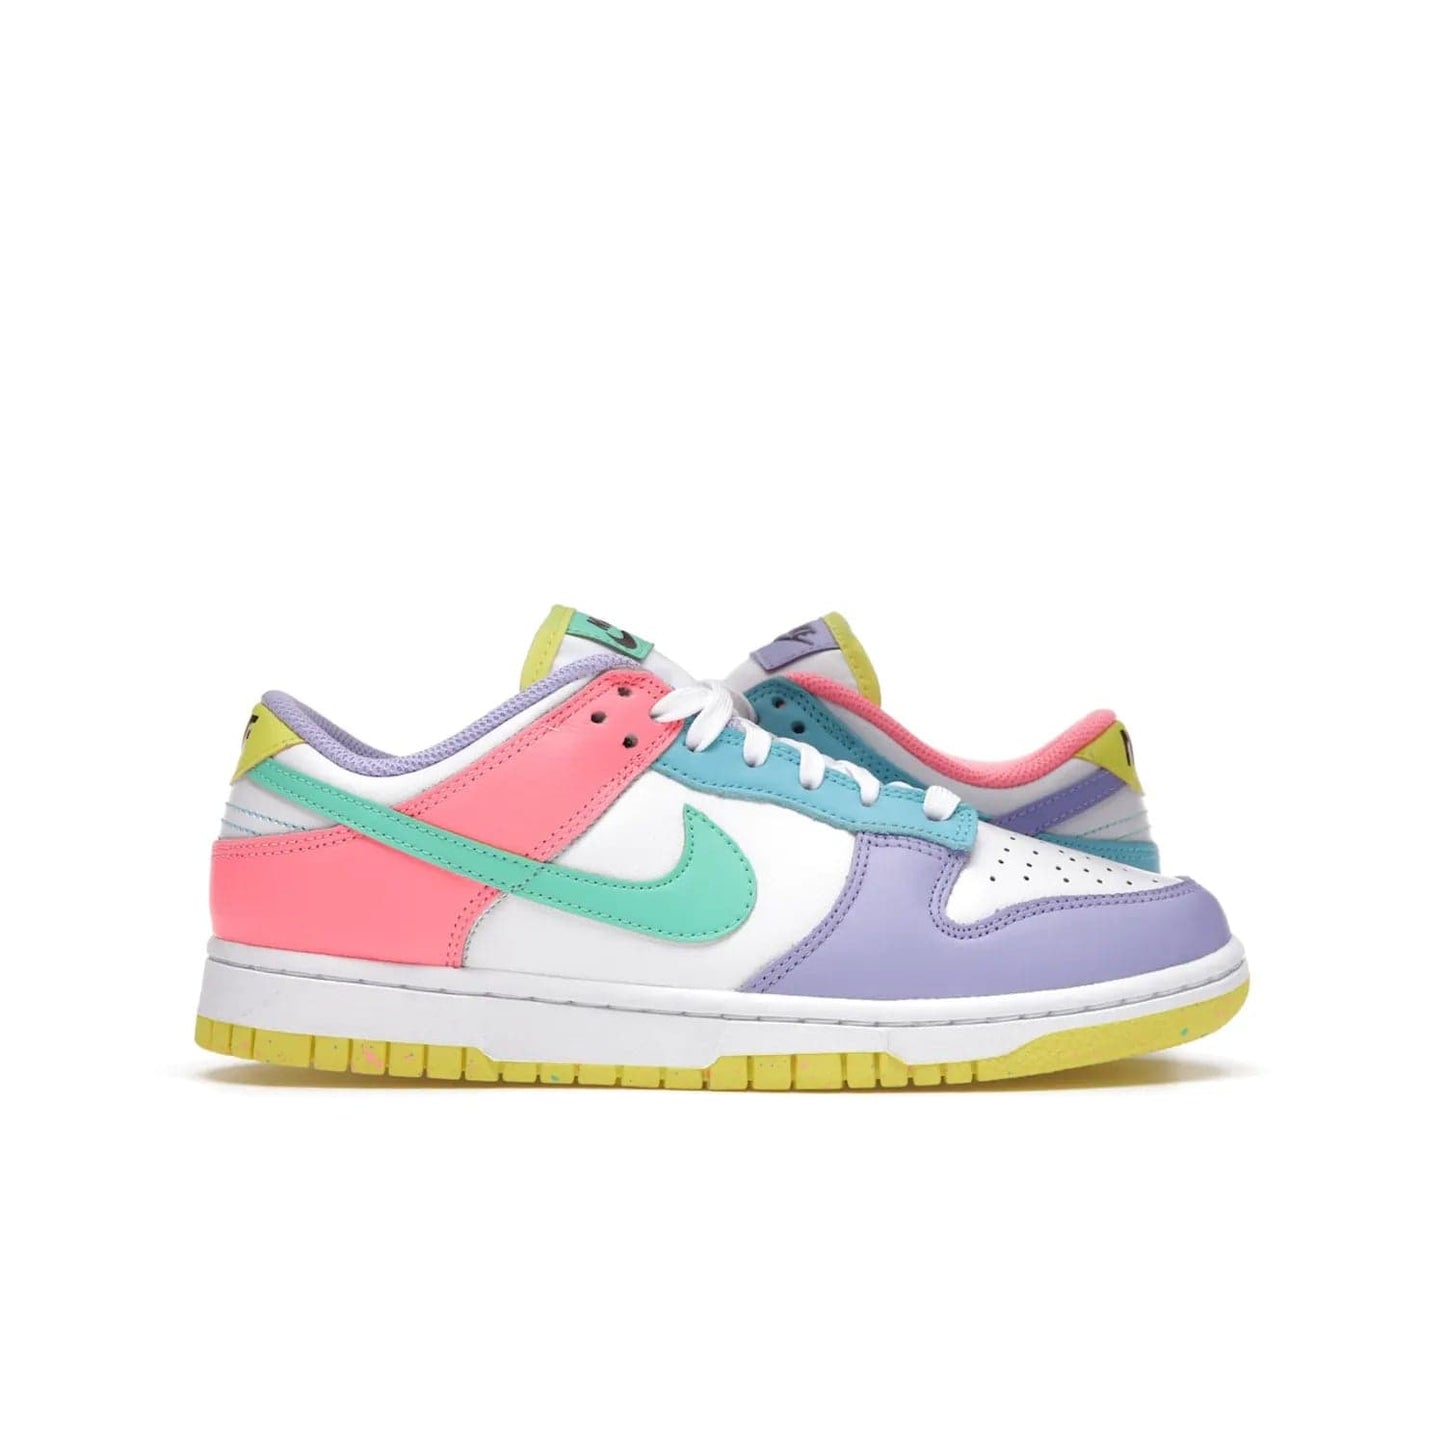 Nike Dunk Low SE Easter Candy (Women's) - Image 1 - Only at www.BallersClubKickz.com - UP
The Nike Dunk Low SE Easter Candy (Women's) brings a stylish touch to any outfit with its white leather upper, colorful accents, and multicolor speckle detailing. Shop now before they're gone.